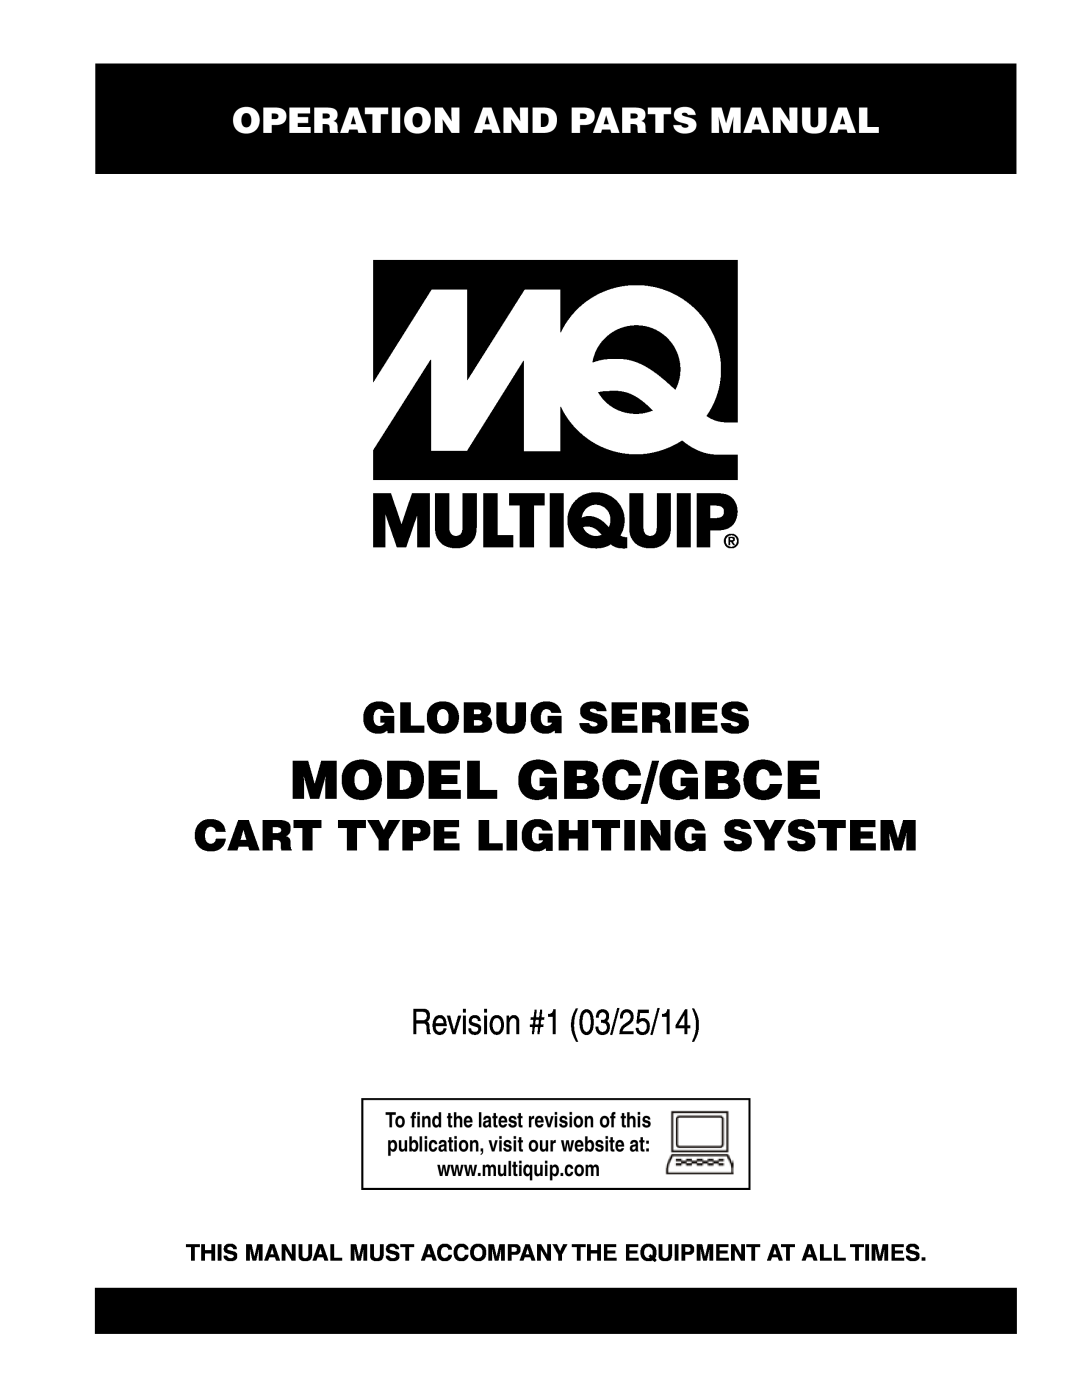 Multiquip gbe/gbce manual Operation and Parts Manual, This Manual Must Accompany The Equipment At All Times, GloBug SERIES 